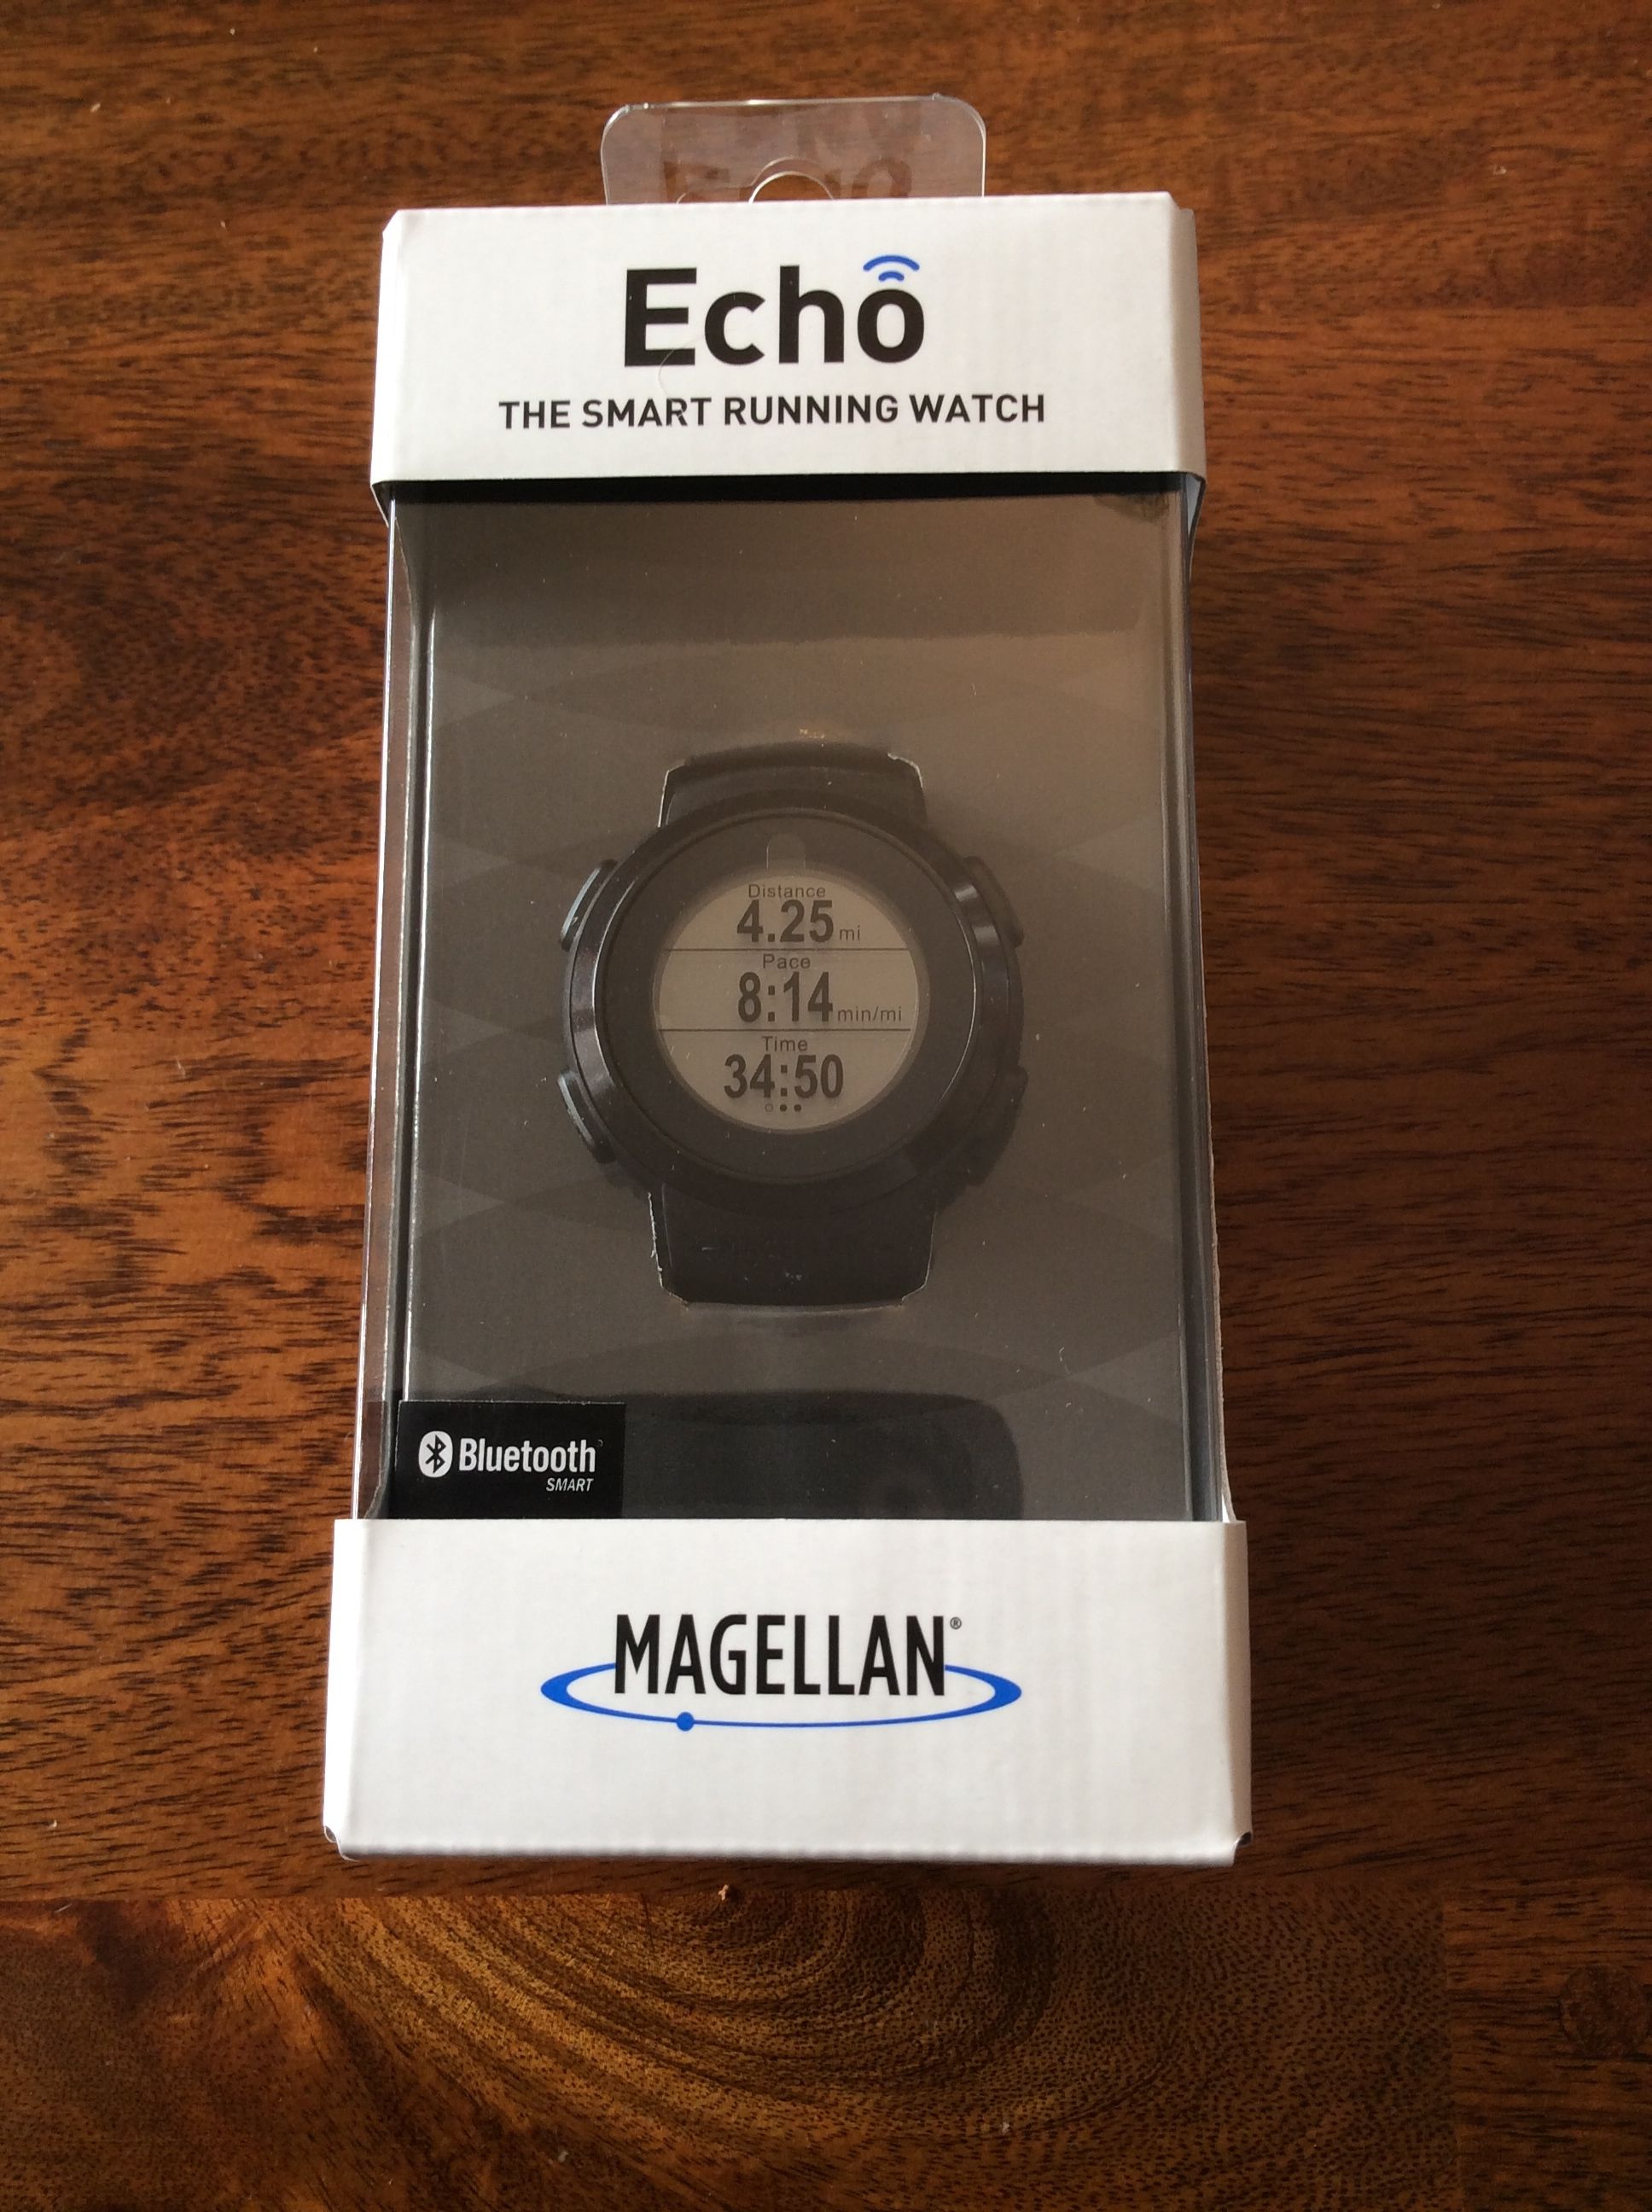 Magellan Echo Uses Smartphone Power to Become More than a Fitness Watch